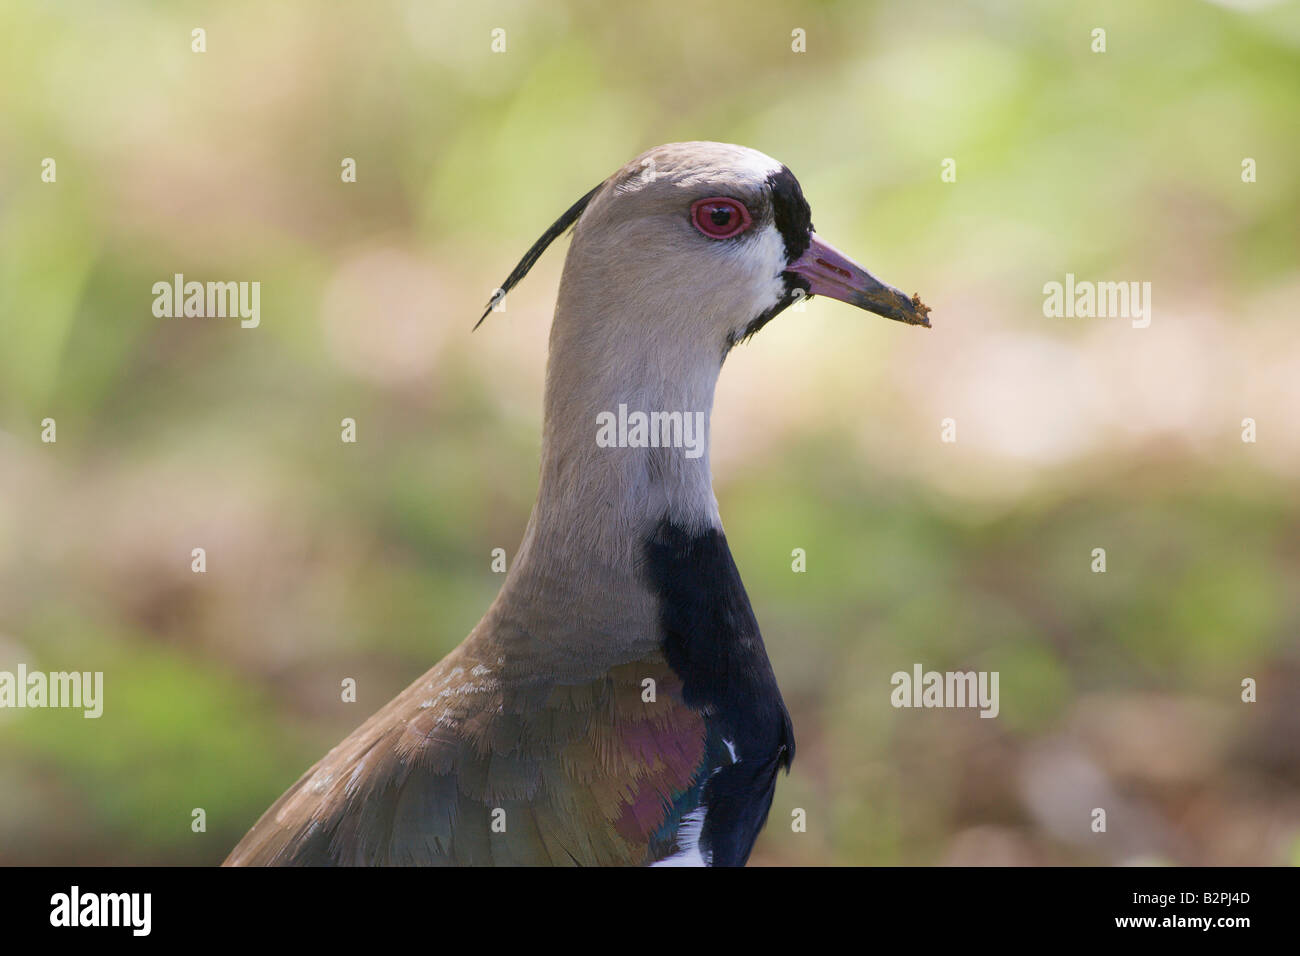 Southern Lapwing Vanellus chilensis close up of head Stock Photo